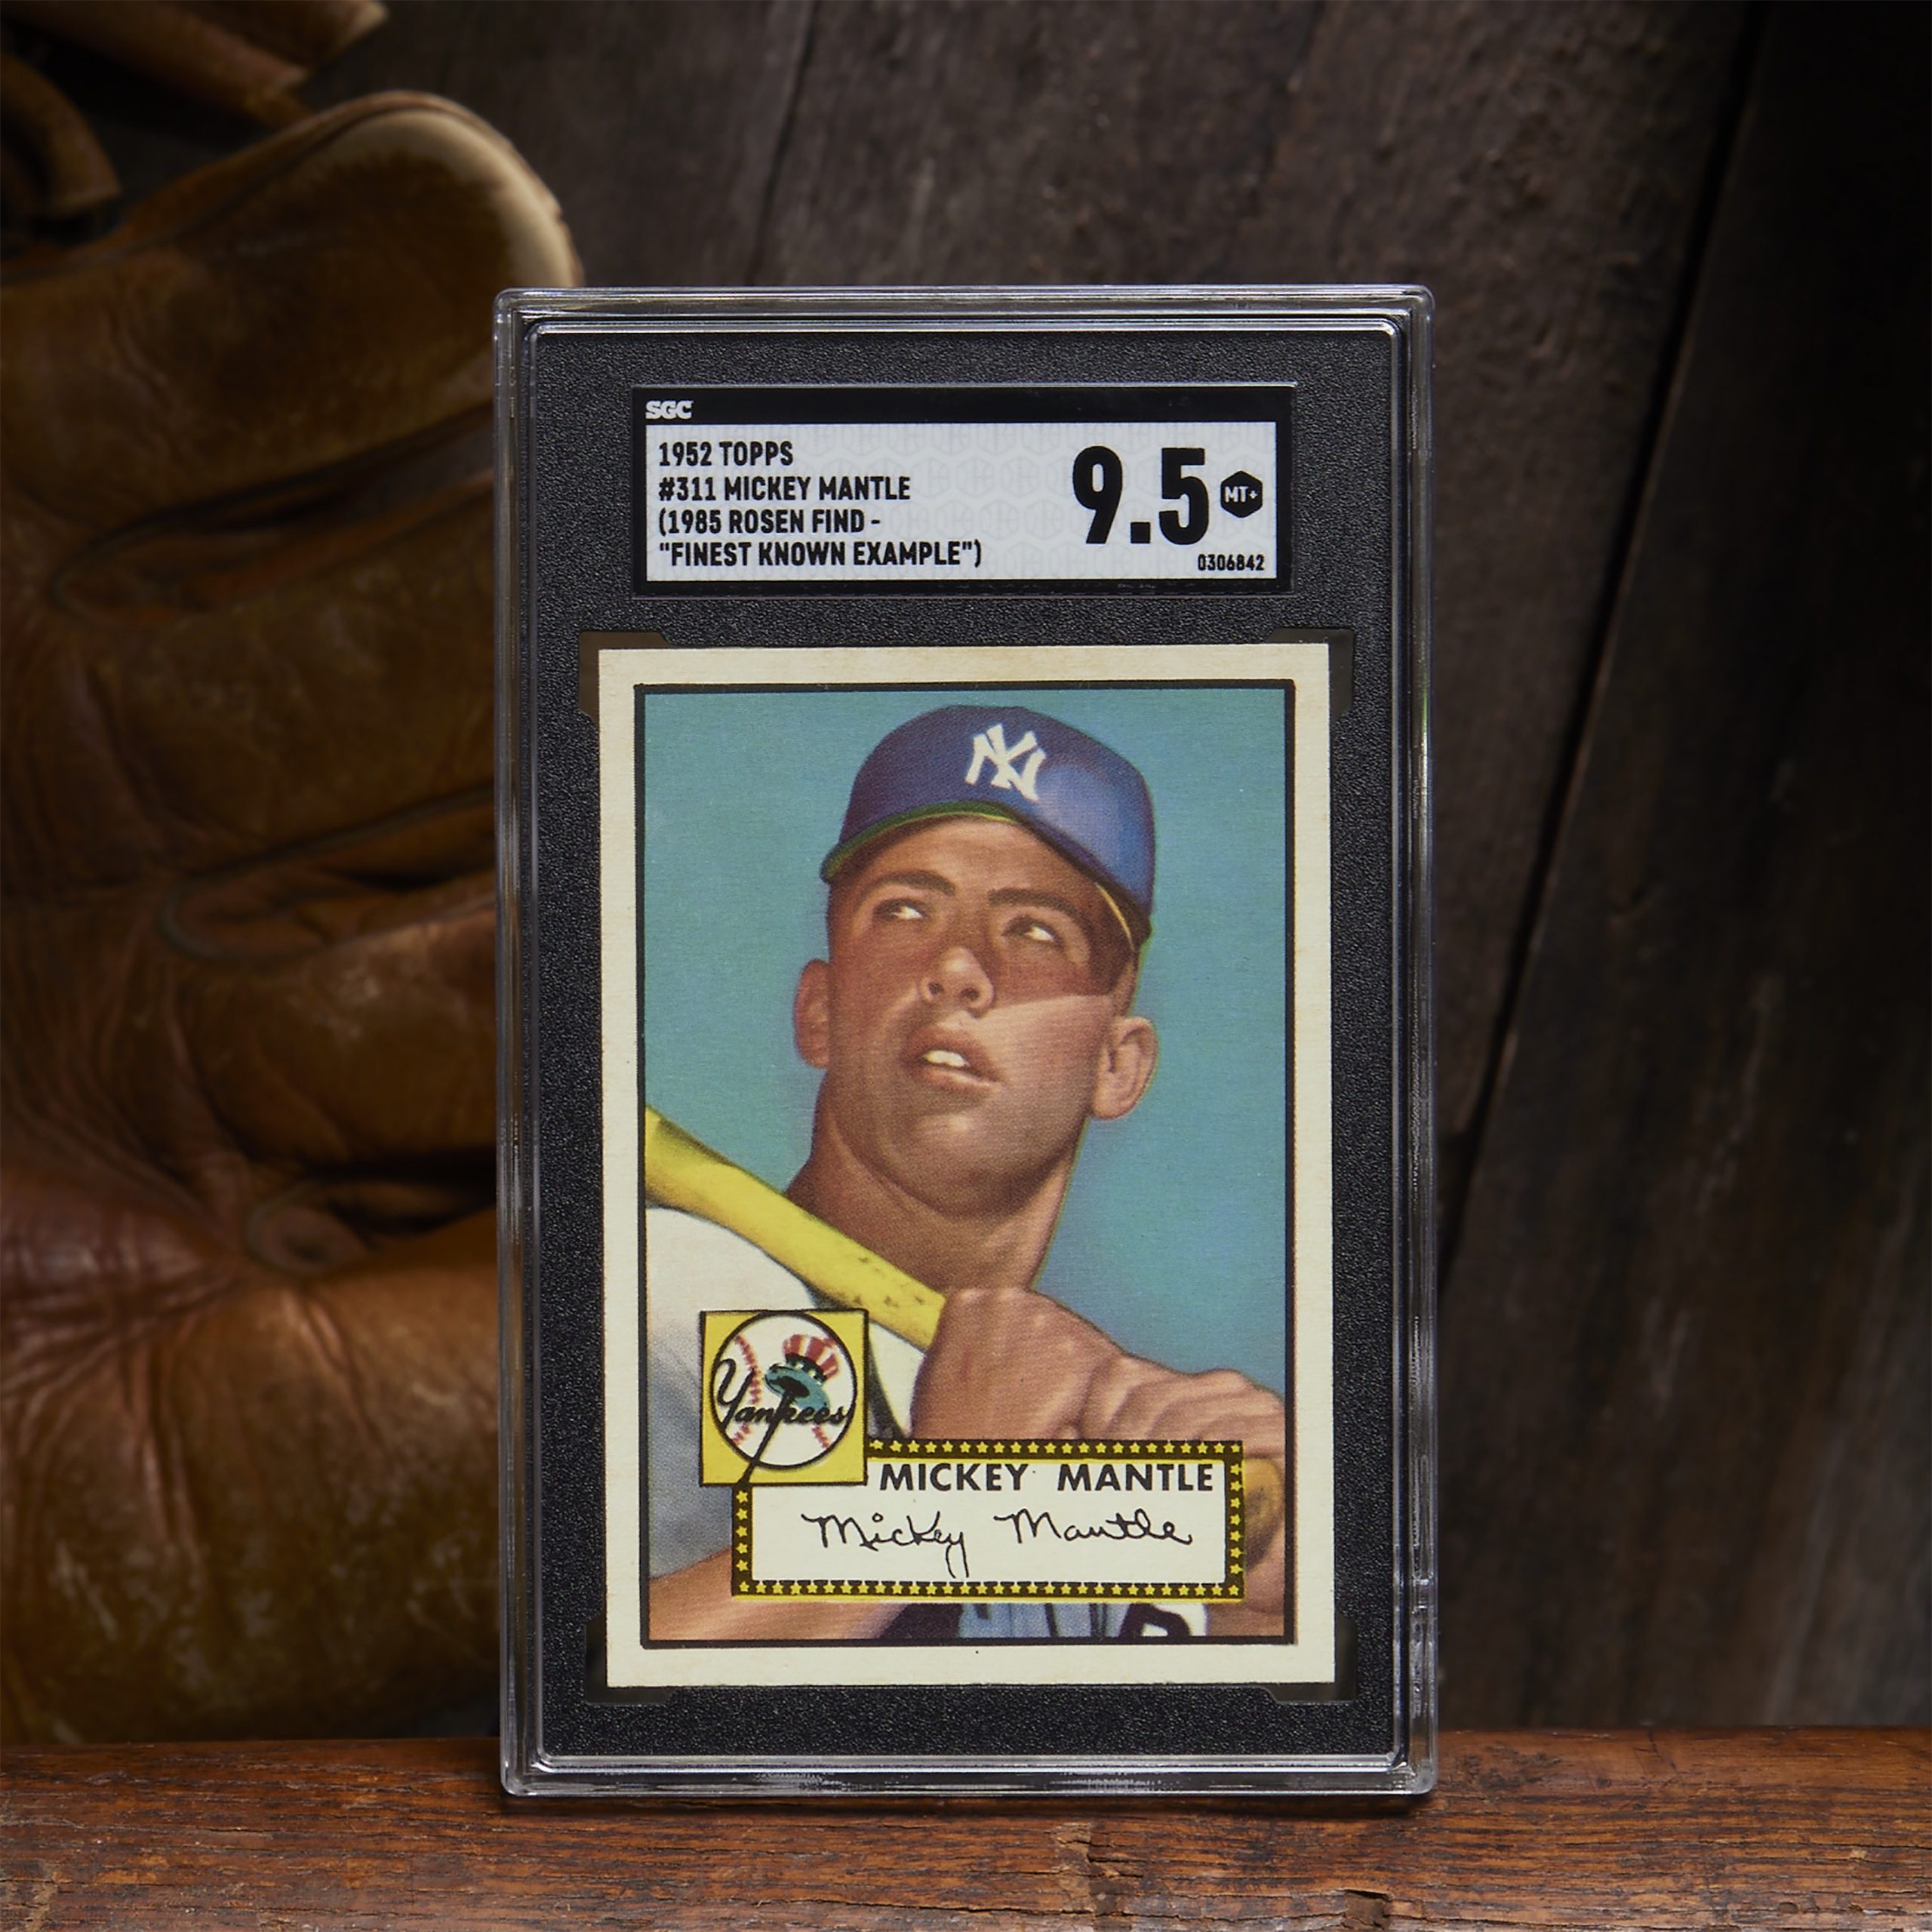 1952 Topps Mickey Mantle Rookie Card Smashes Price Record at 12.6 Million